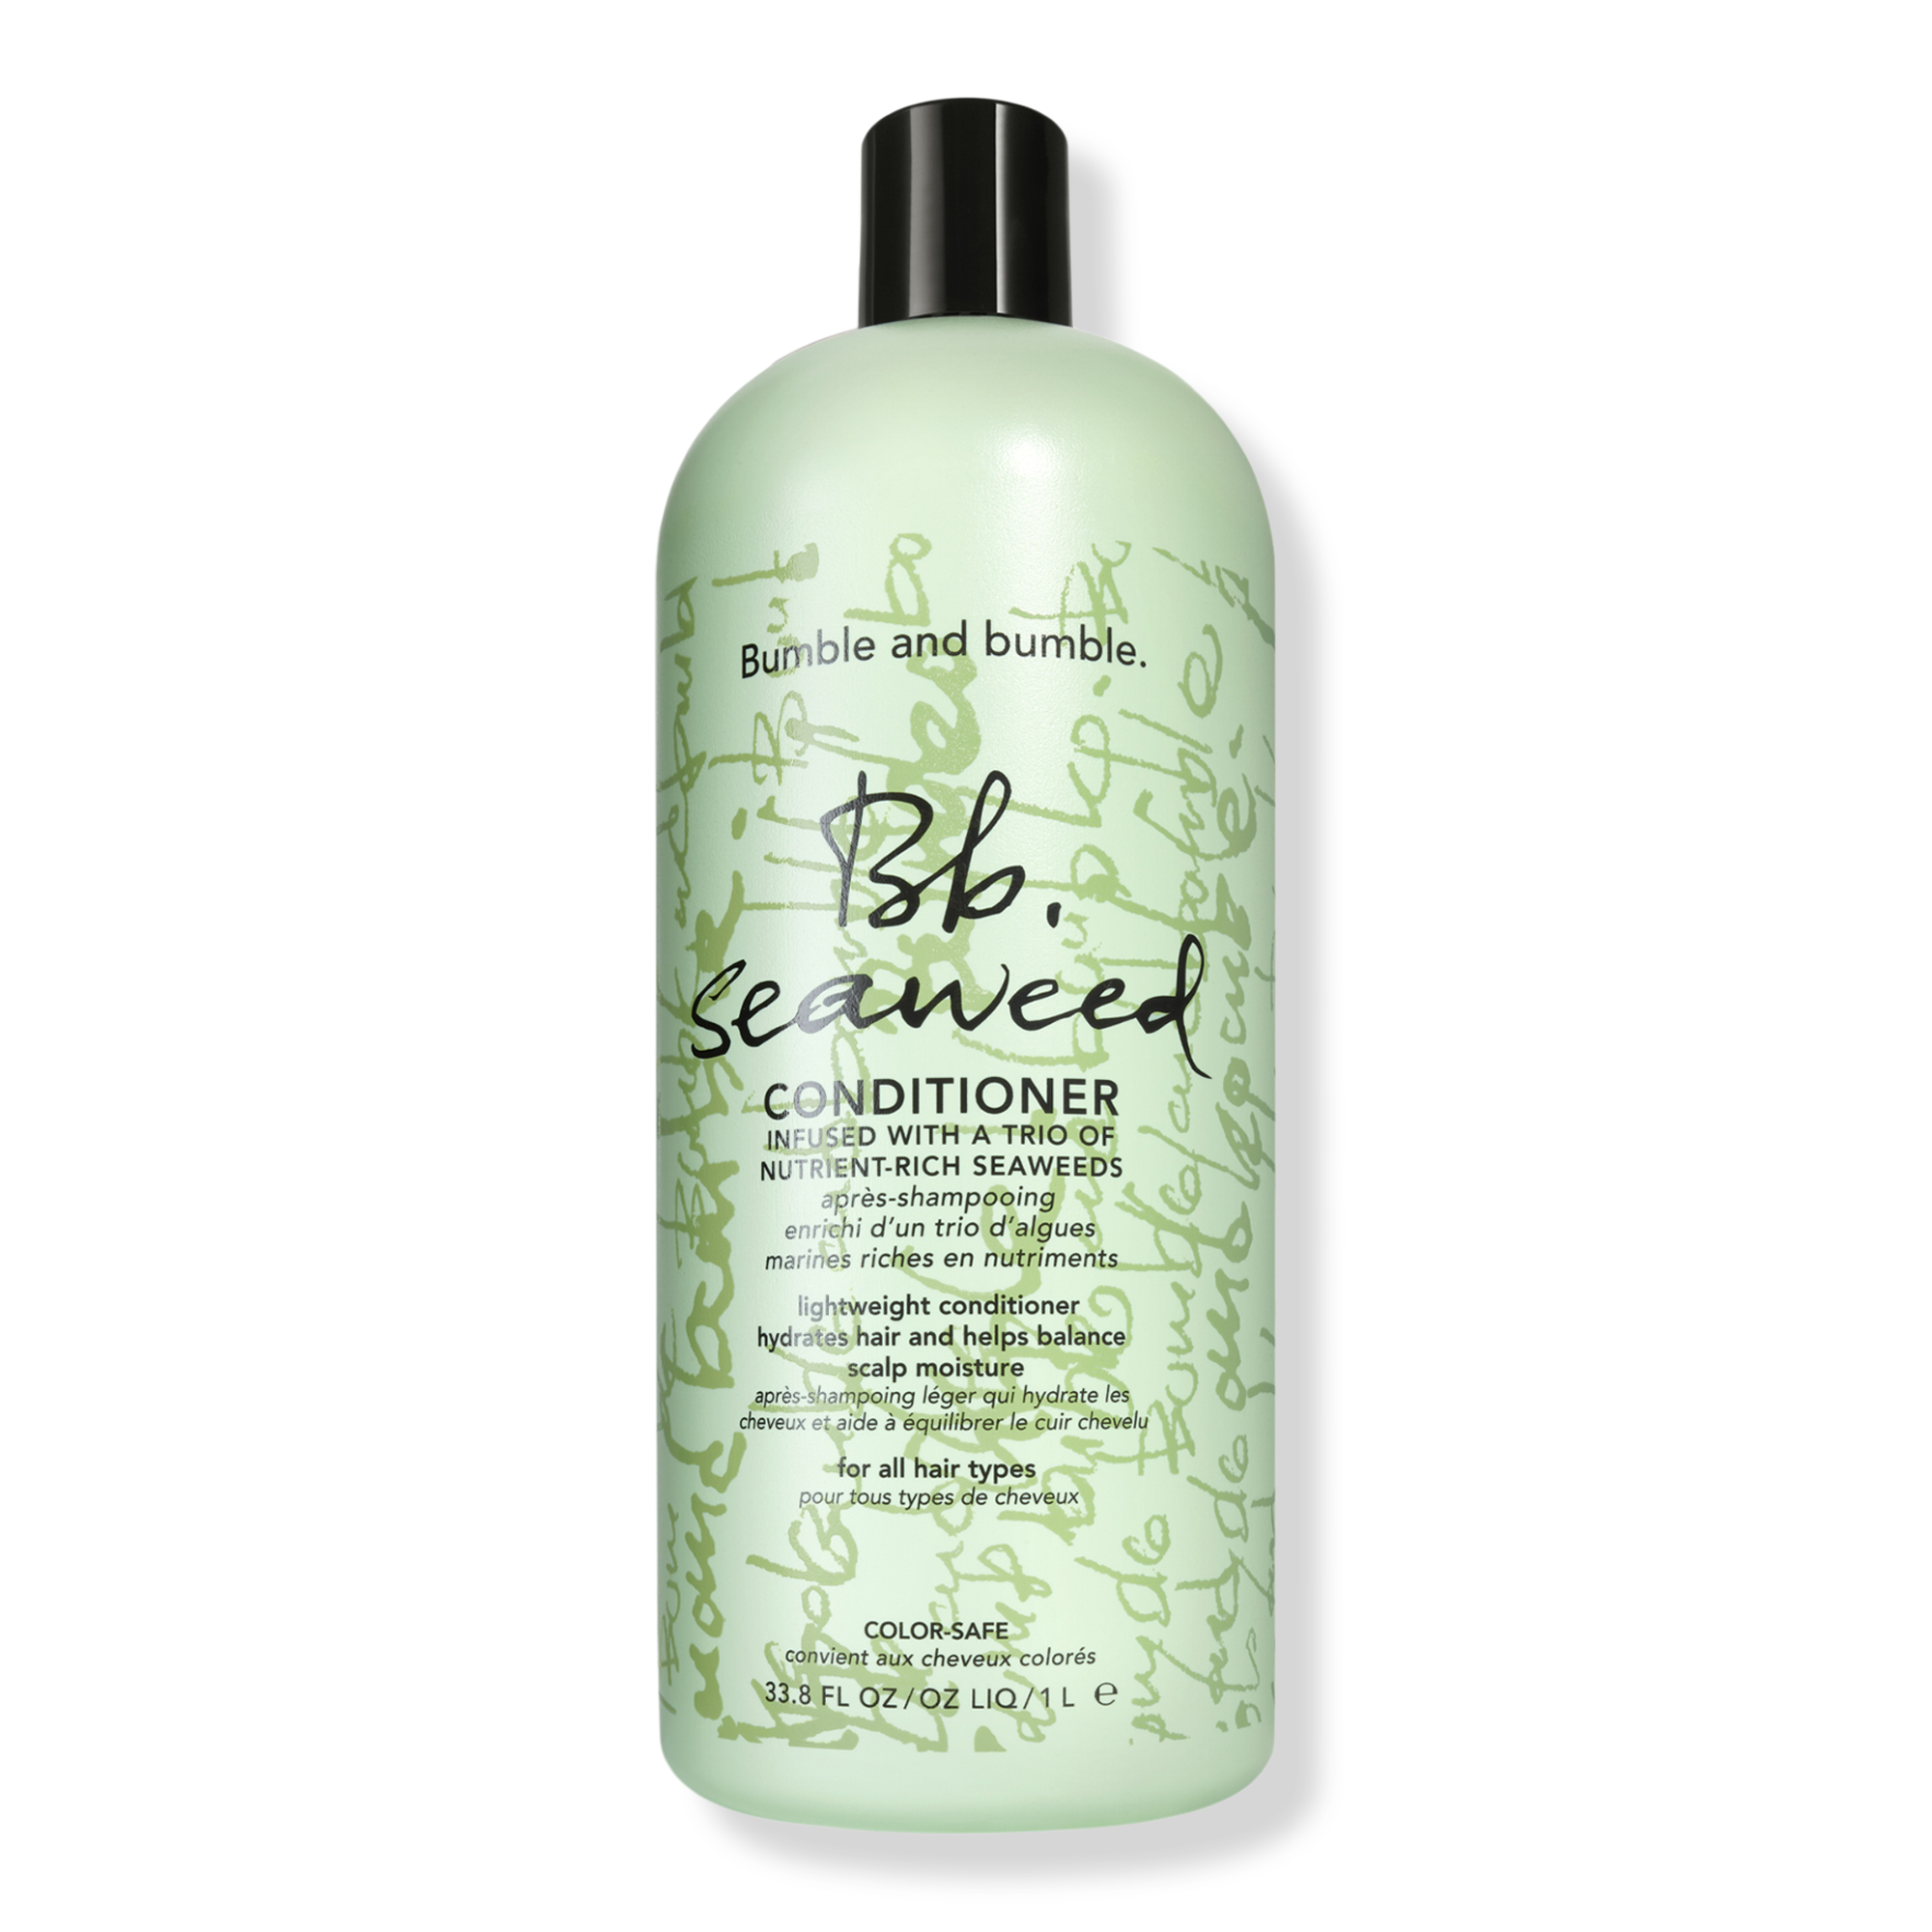 Bumble and bumble Seaweed Conditioner / 33OZ